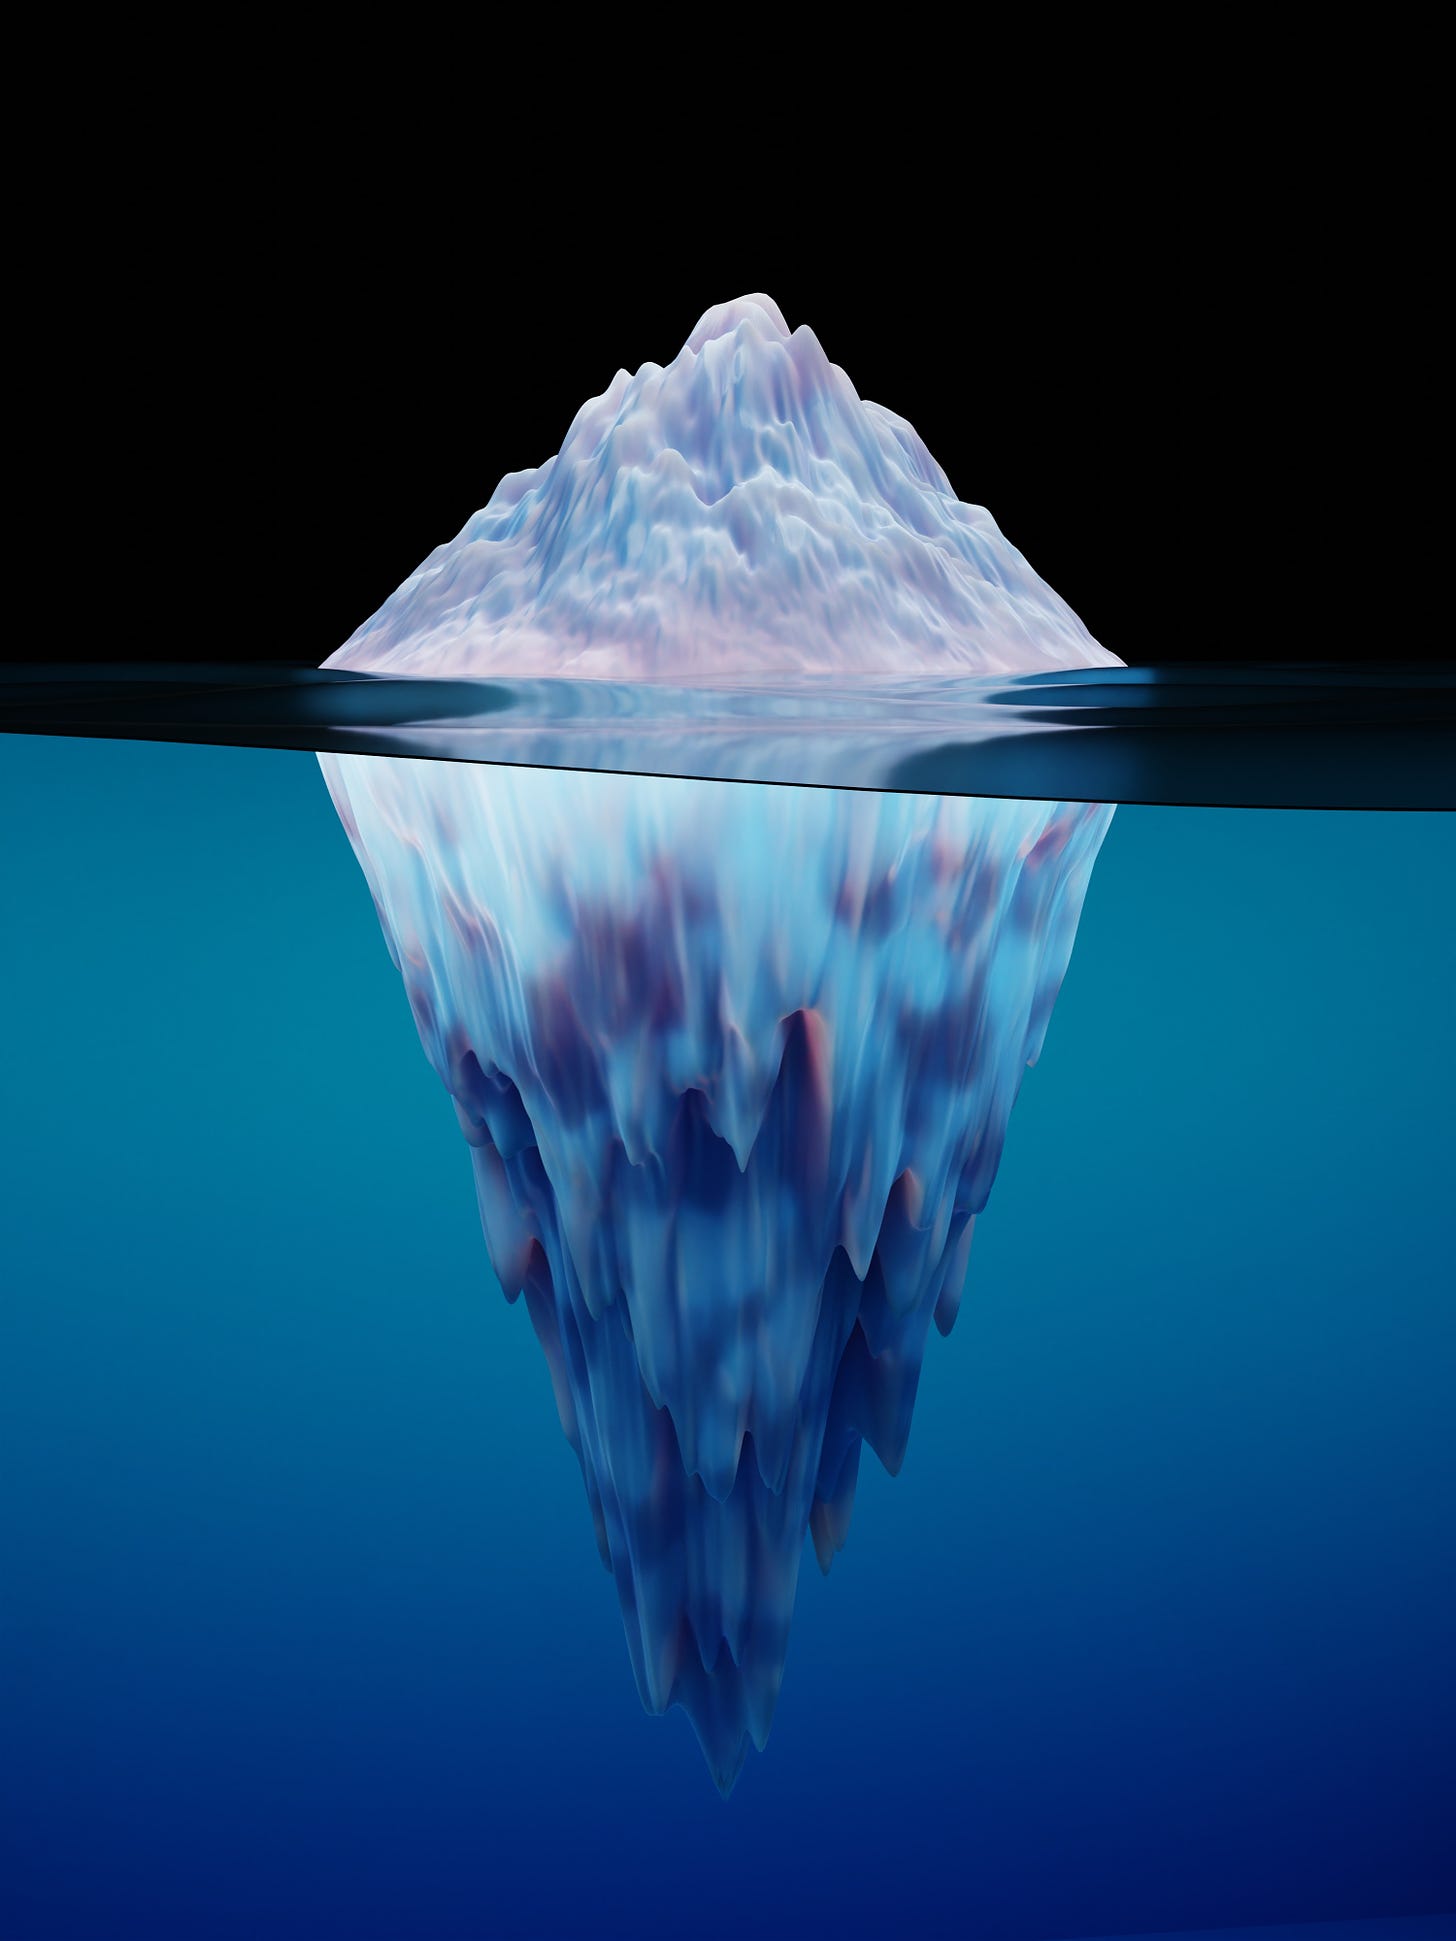 Image description: iceberg visible above the water and below the water.  